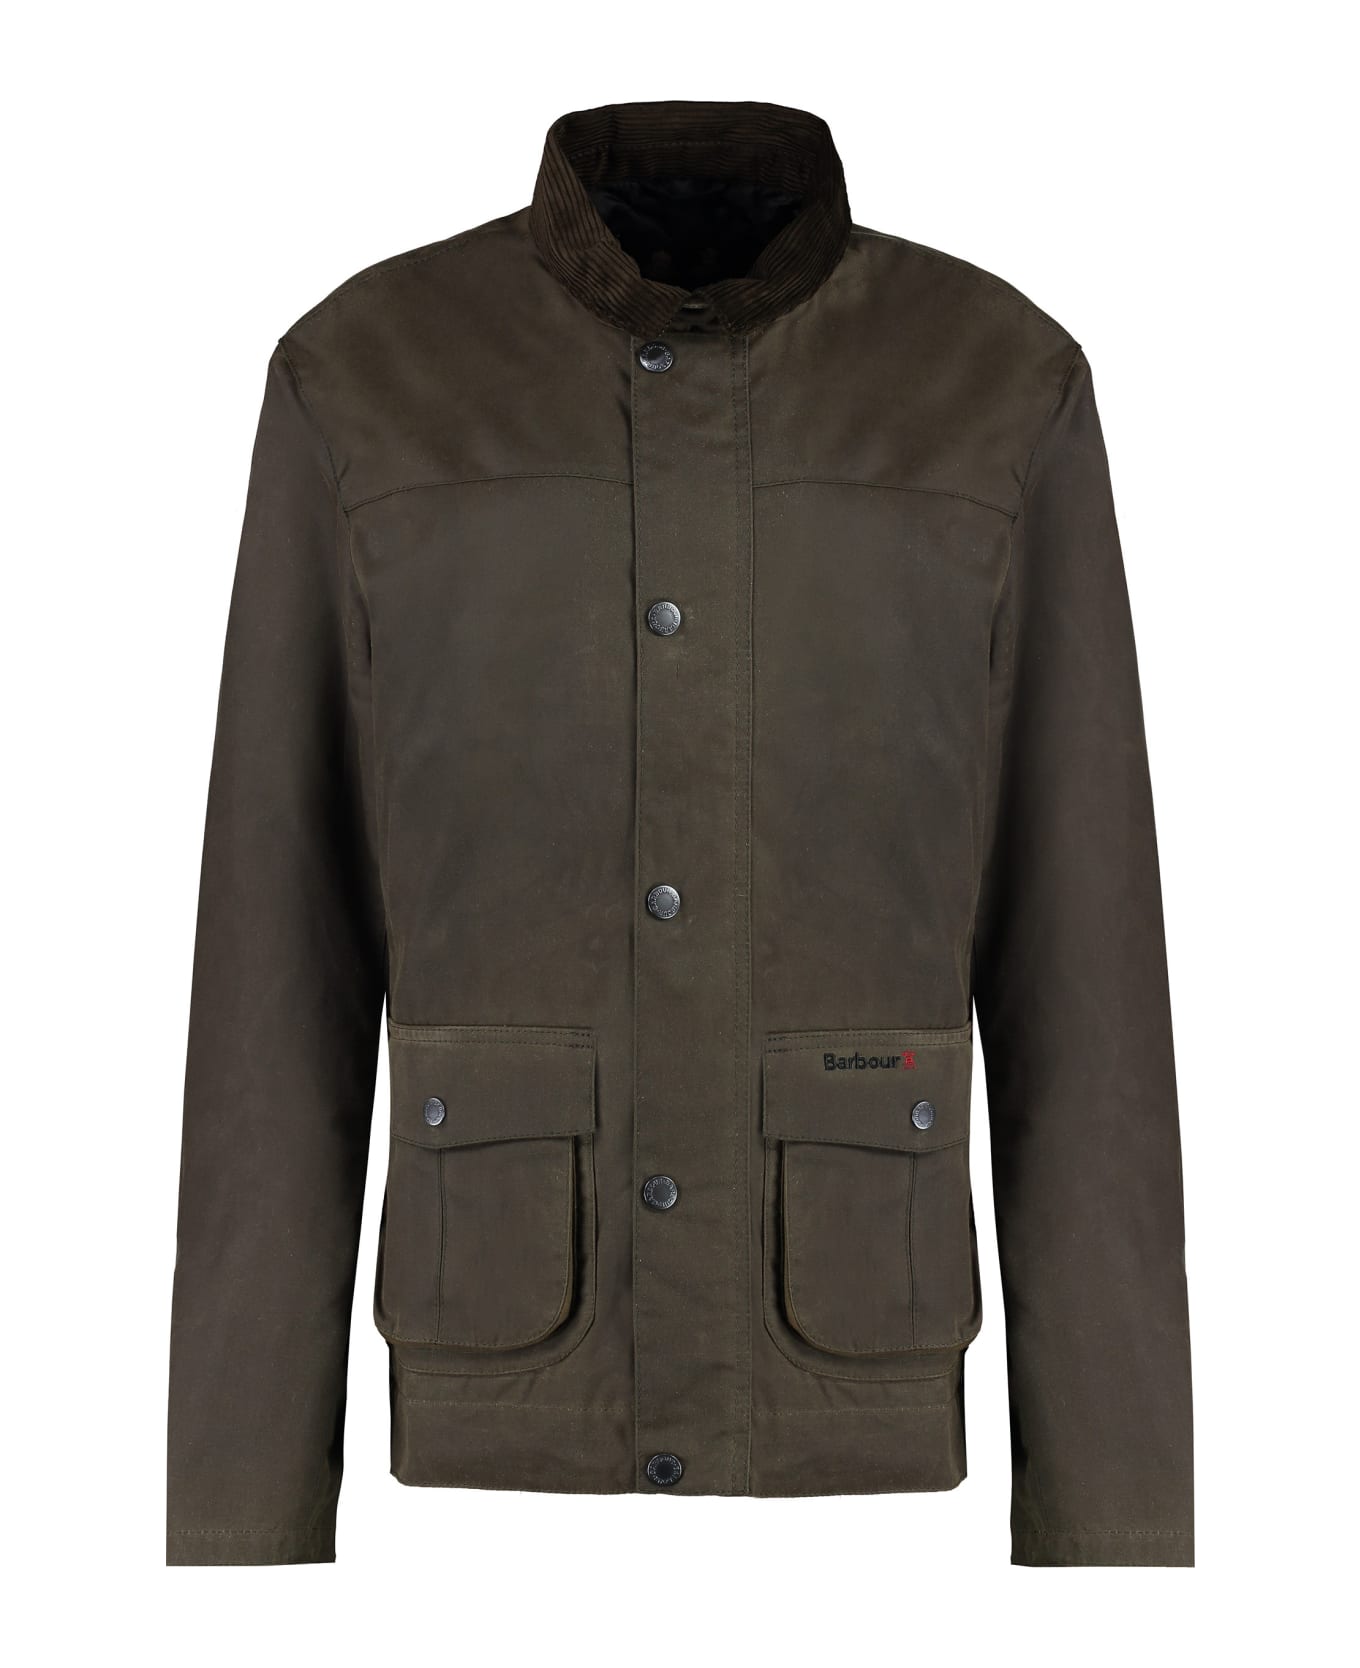 Barbour Brunden Waxed Cotton Jacket - green